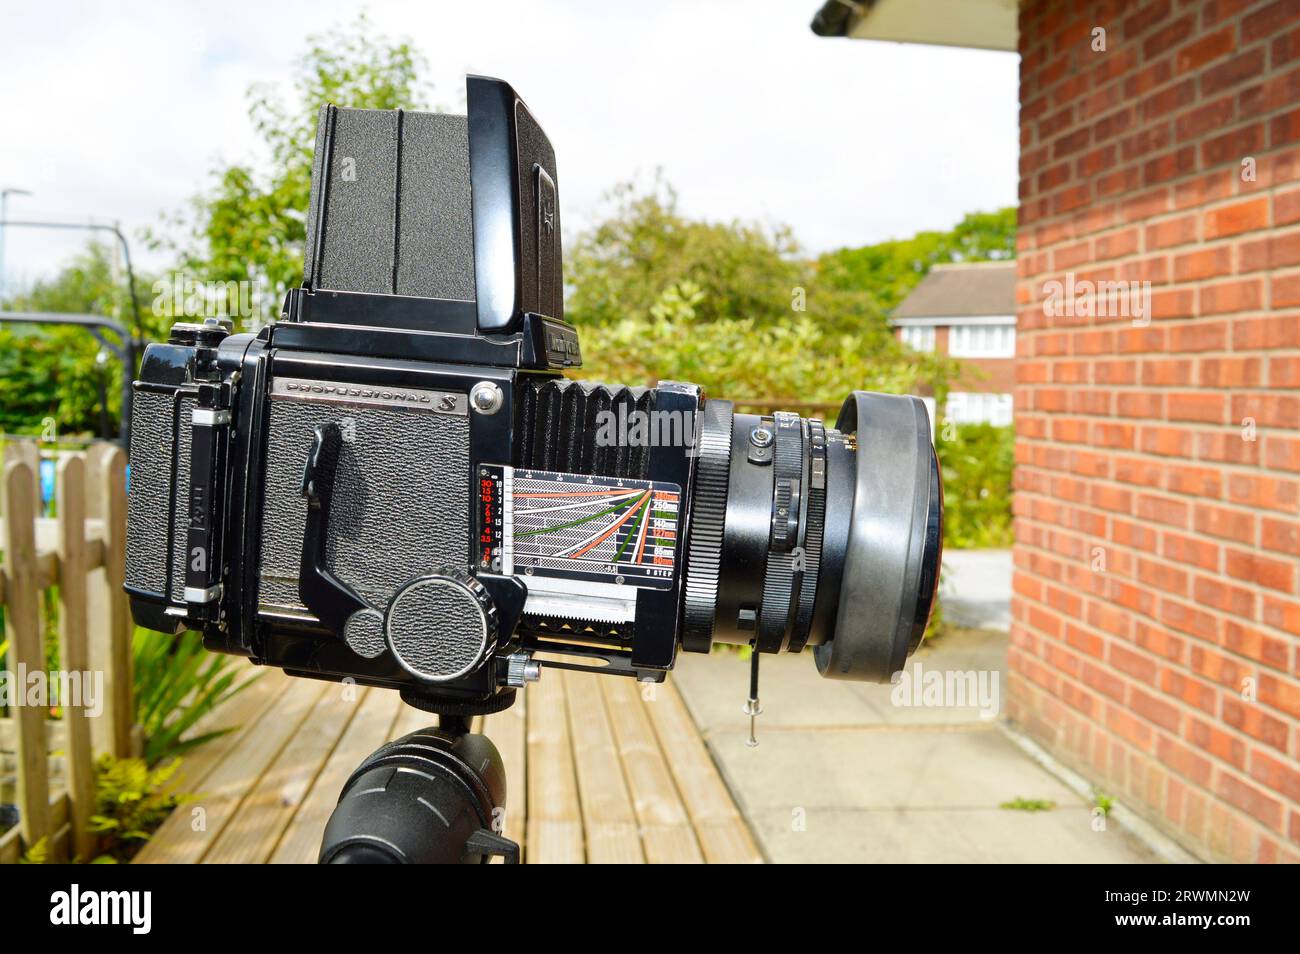 Medium format camera mounted on a tripod outside on decking Stock Photo